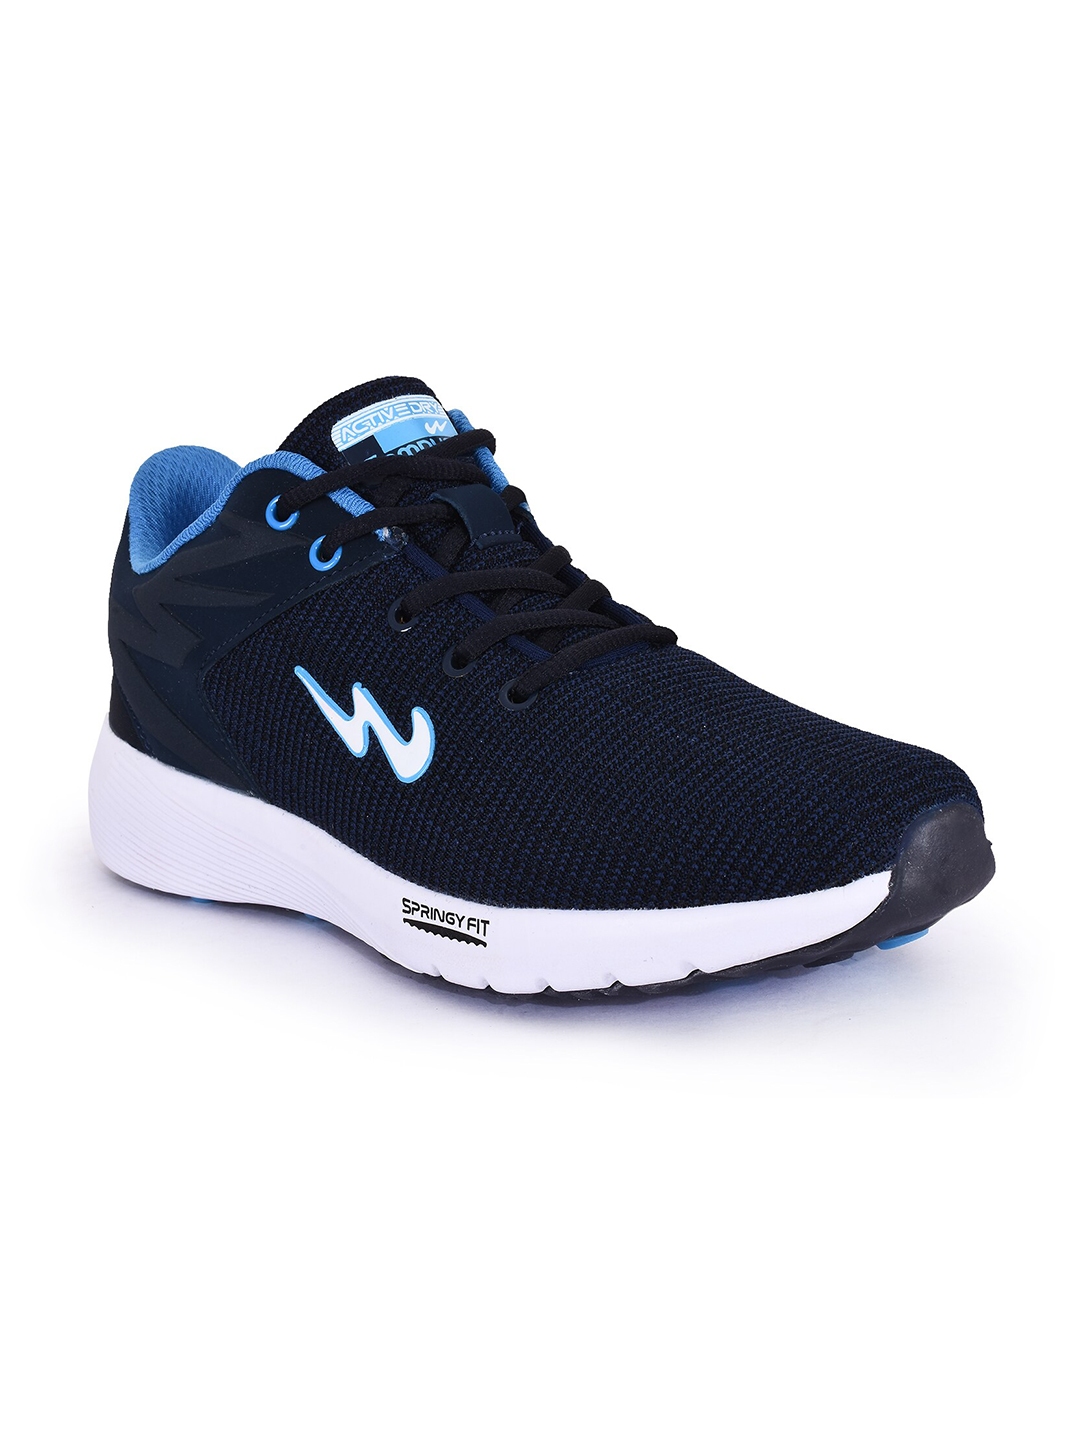 Buy Campus Men Navy Blue Mesh Running Shoes - Sports Shoes for Men ...